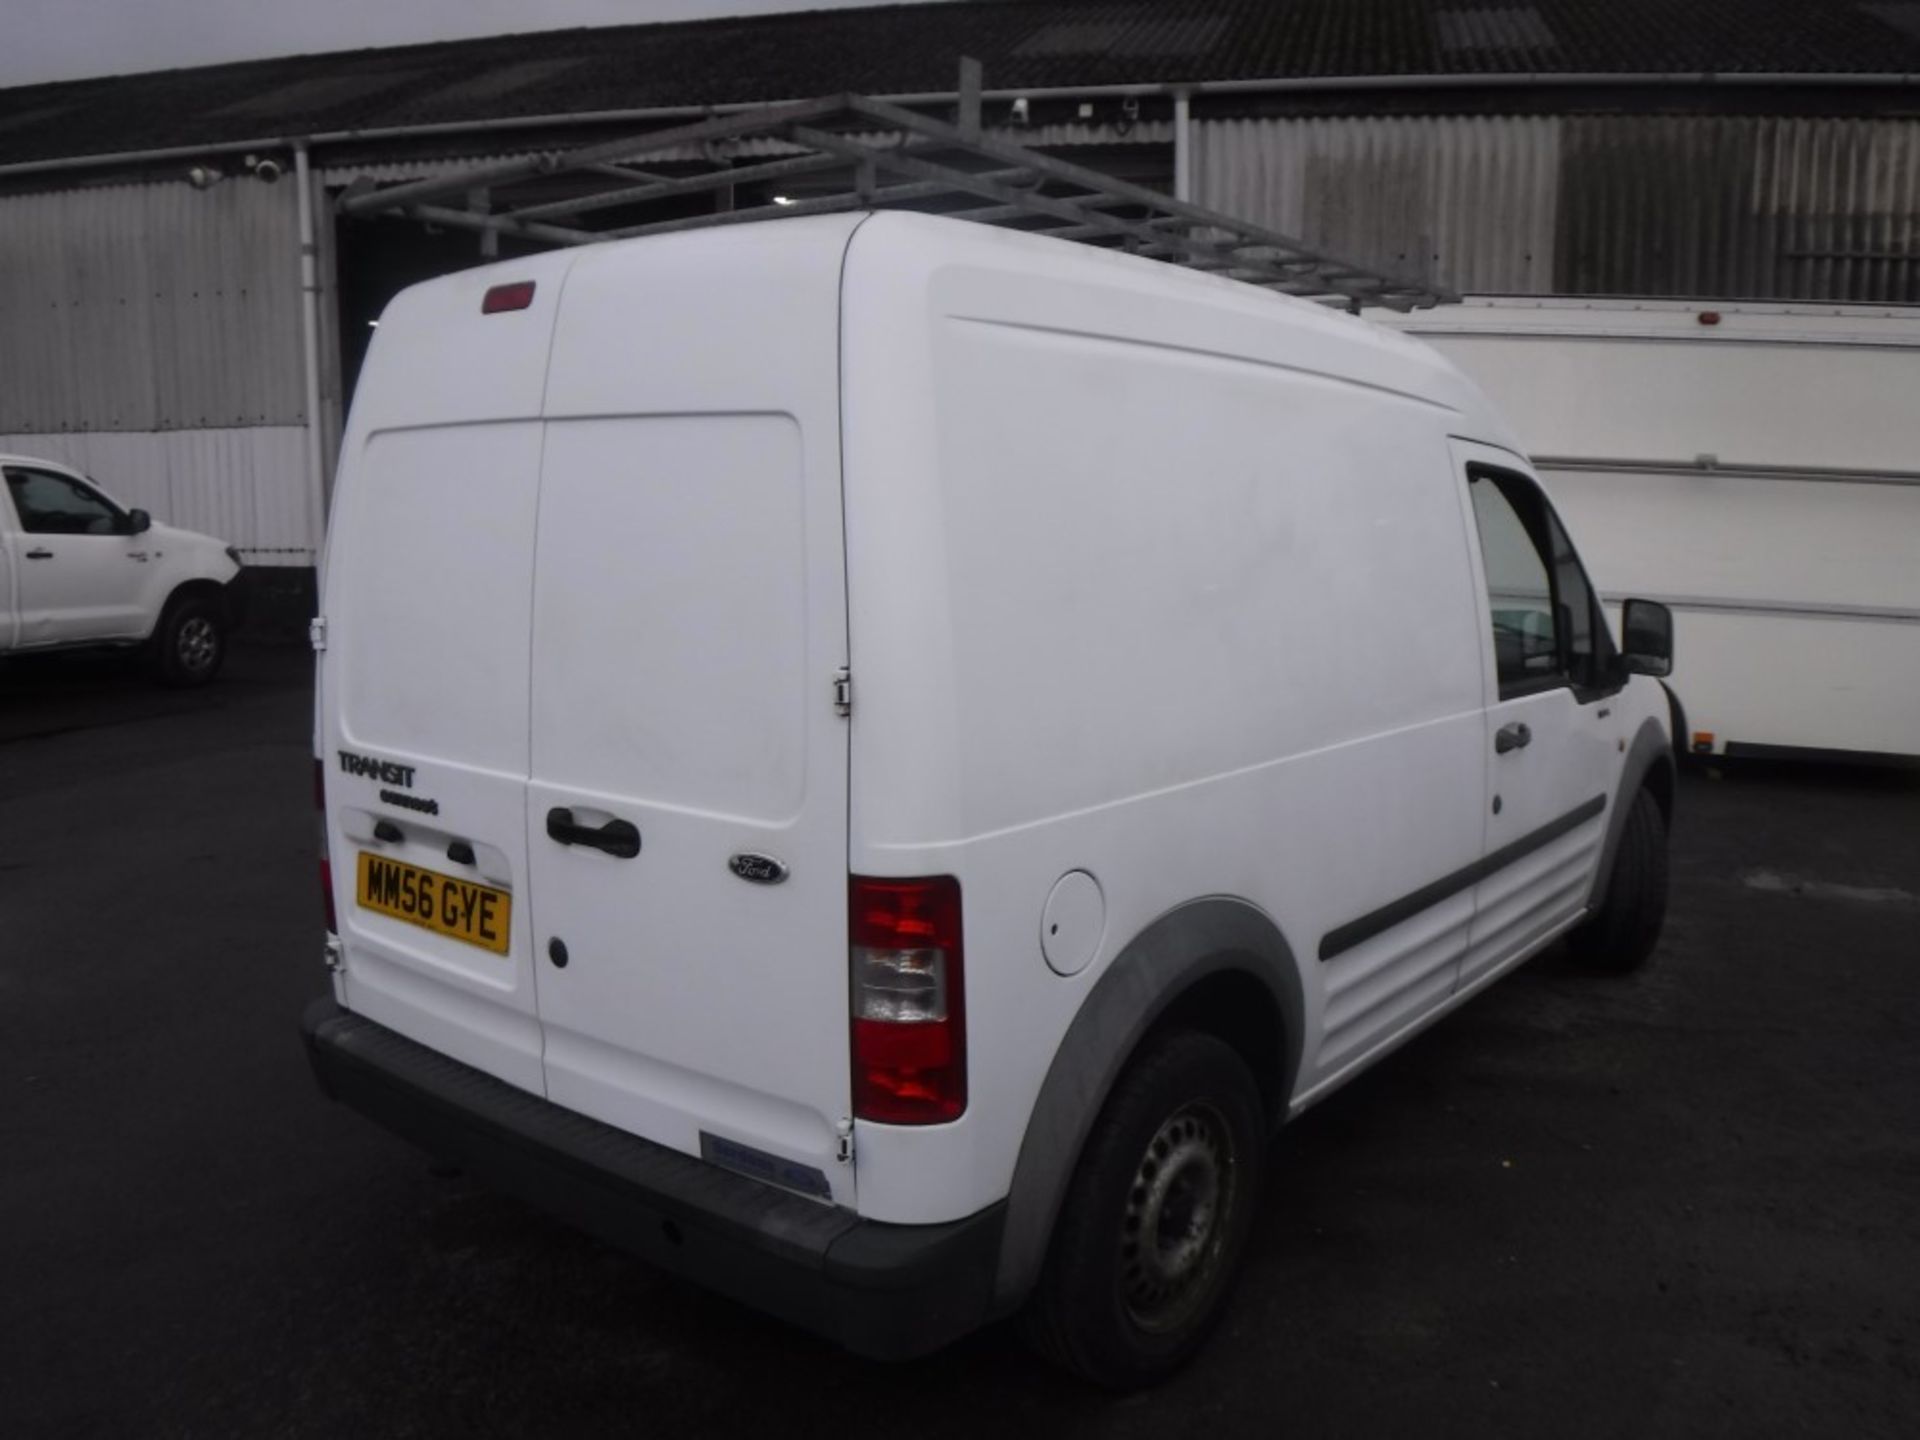 56 reg FORD TRANSIT CONNECT T230 L90, 1ST REG 02/07, TEST 12/18, 101728M, V5 HERE, 1 OWNER FROM - Image 4 of 5